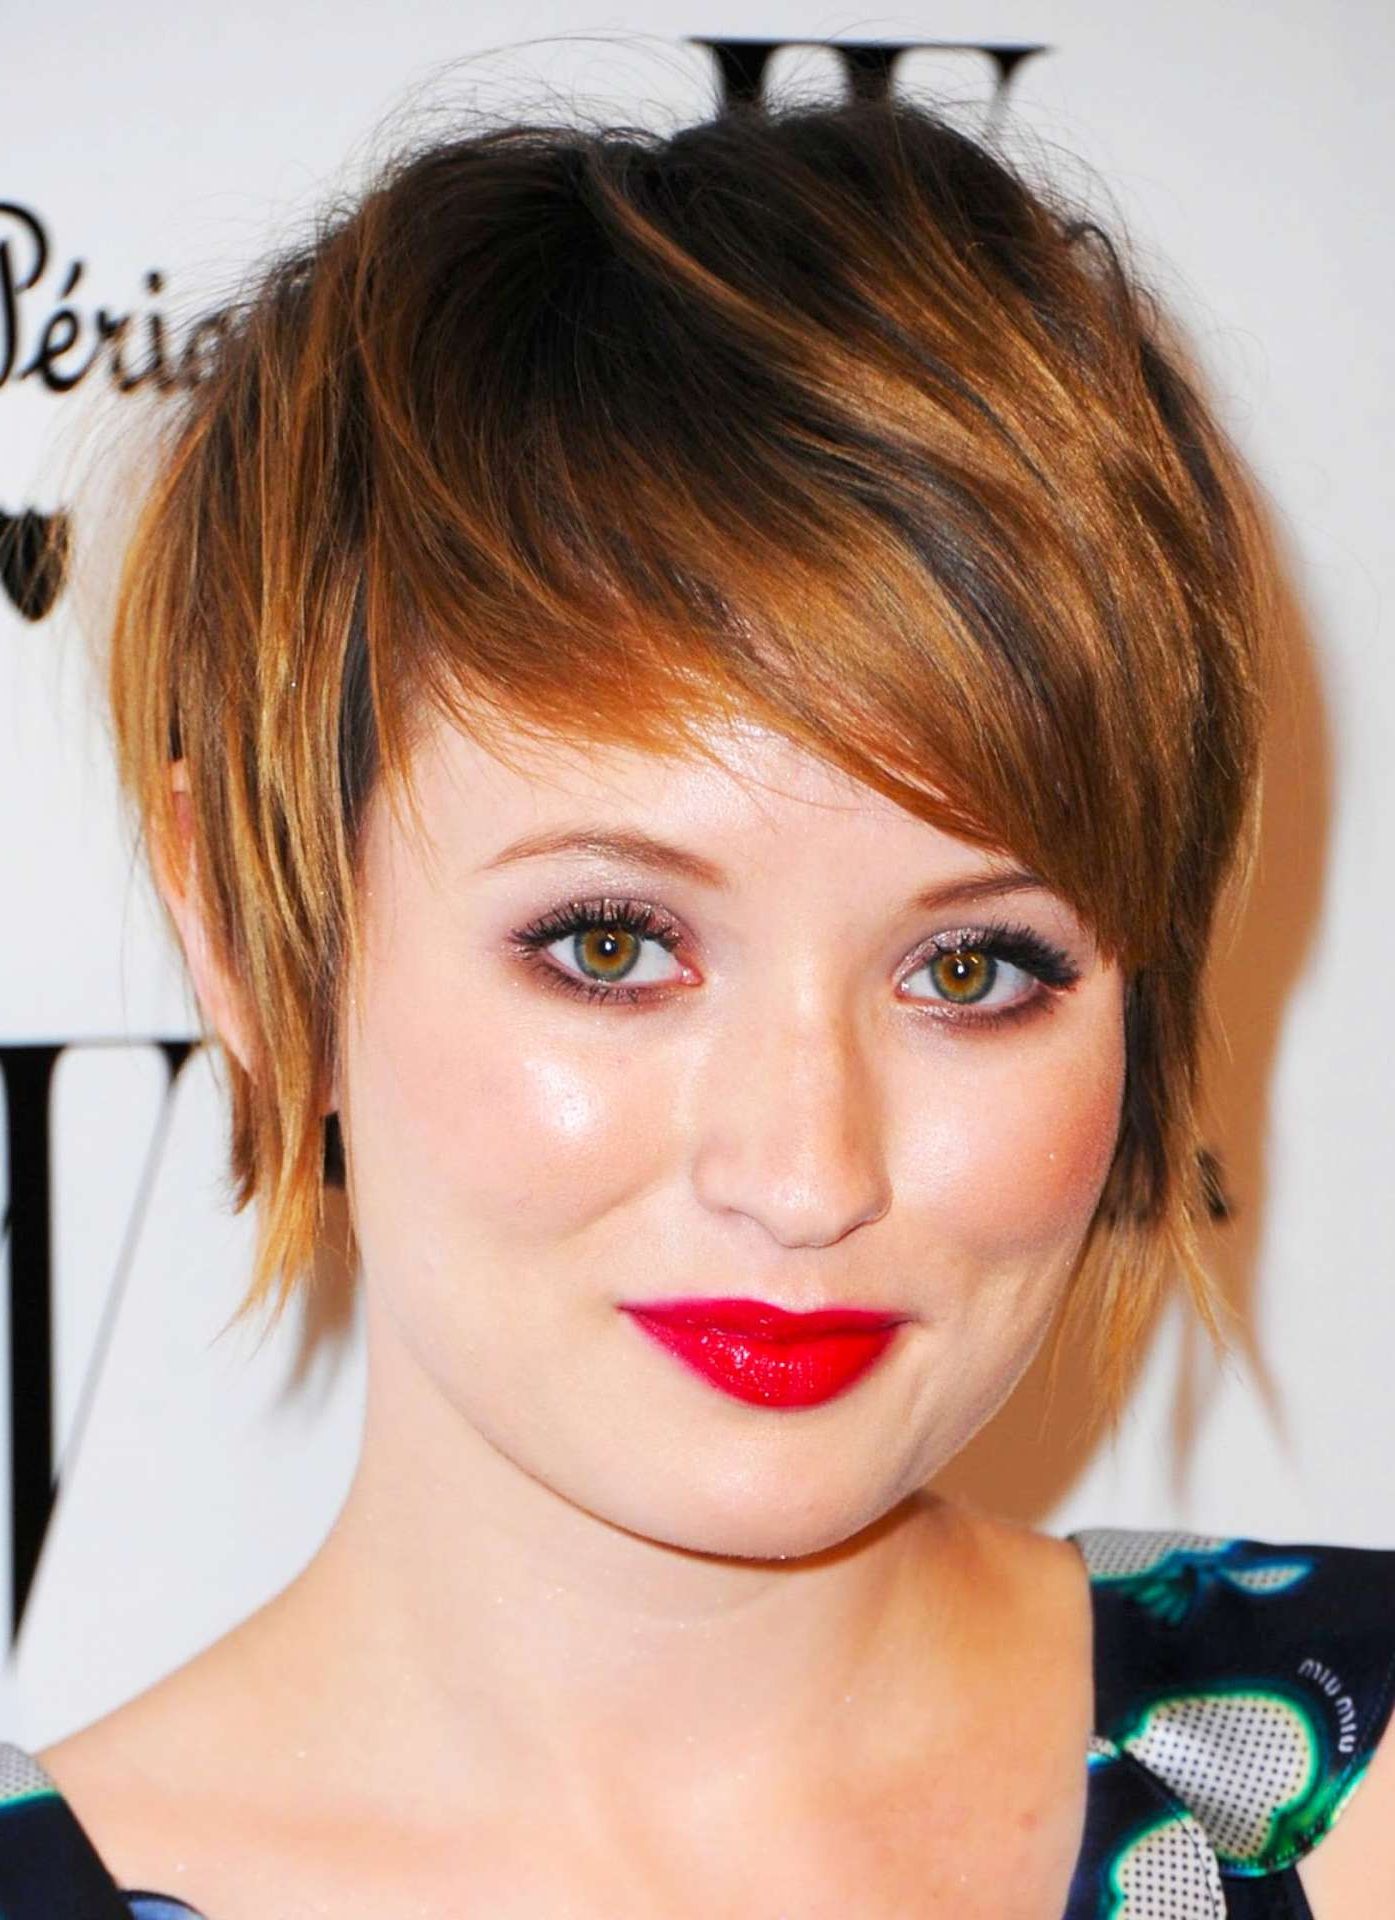 14 Best Short Haircuts For Women With Round Faces Regarding Short Hair For Round Chubby Face (View 7 of 25)